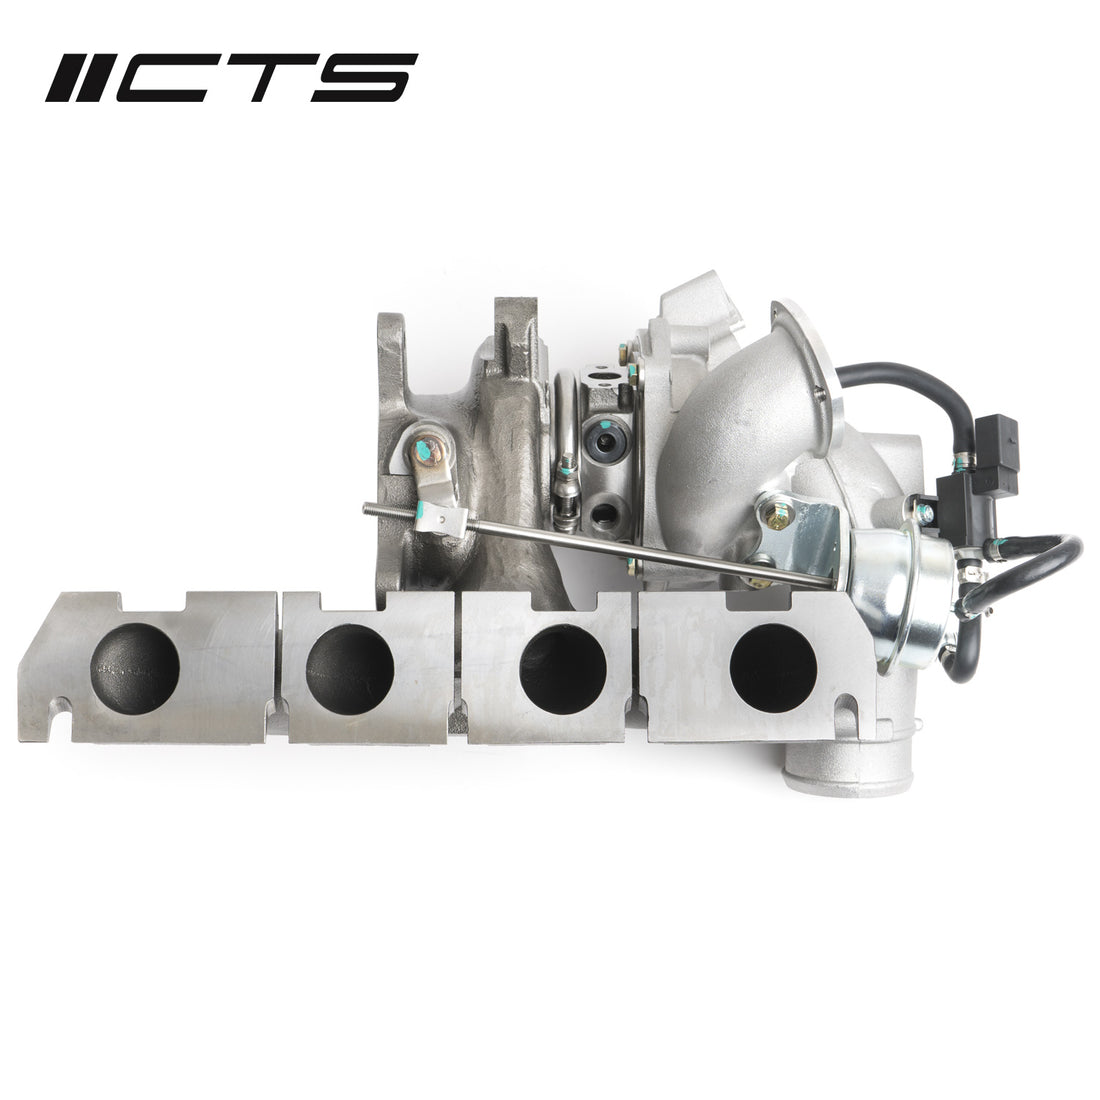 CTS Turbo K04-X Hybrid Turbocharger for FSI and TSI Gen1 Engines (EA113 and EA888.1) CTS Turbo TR-1050X